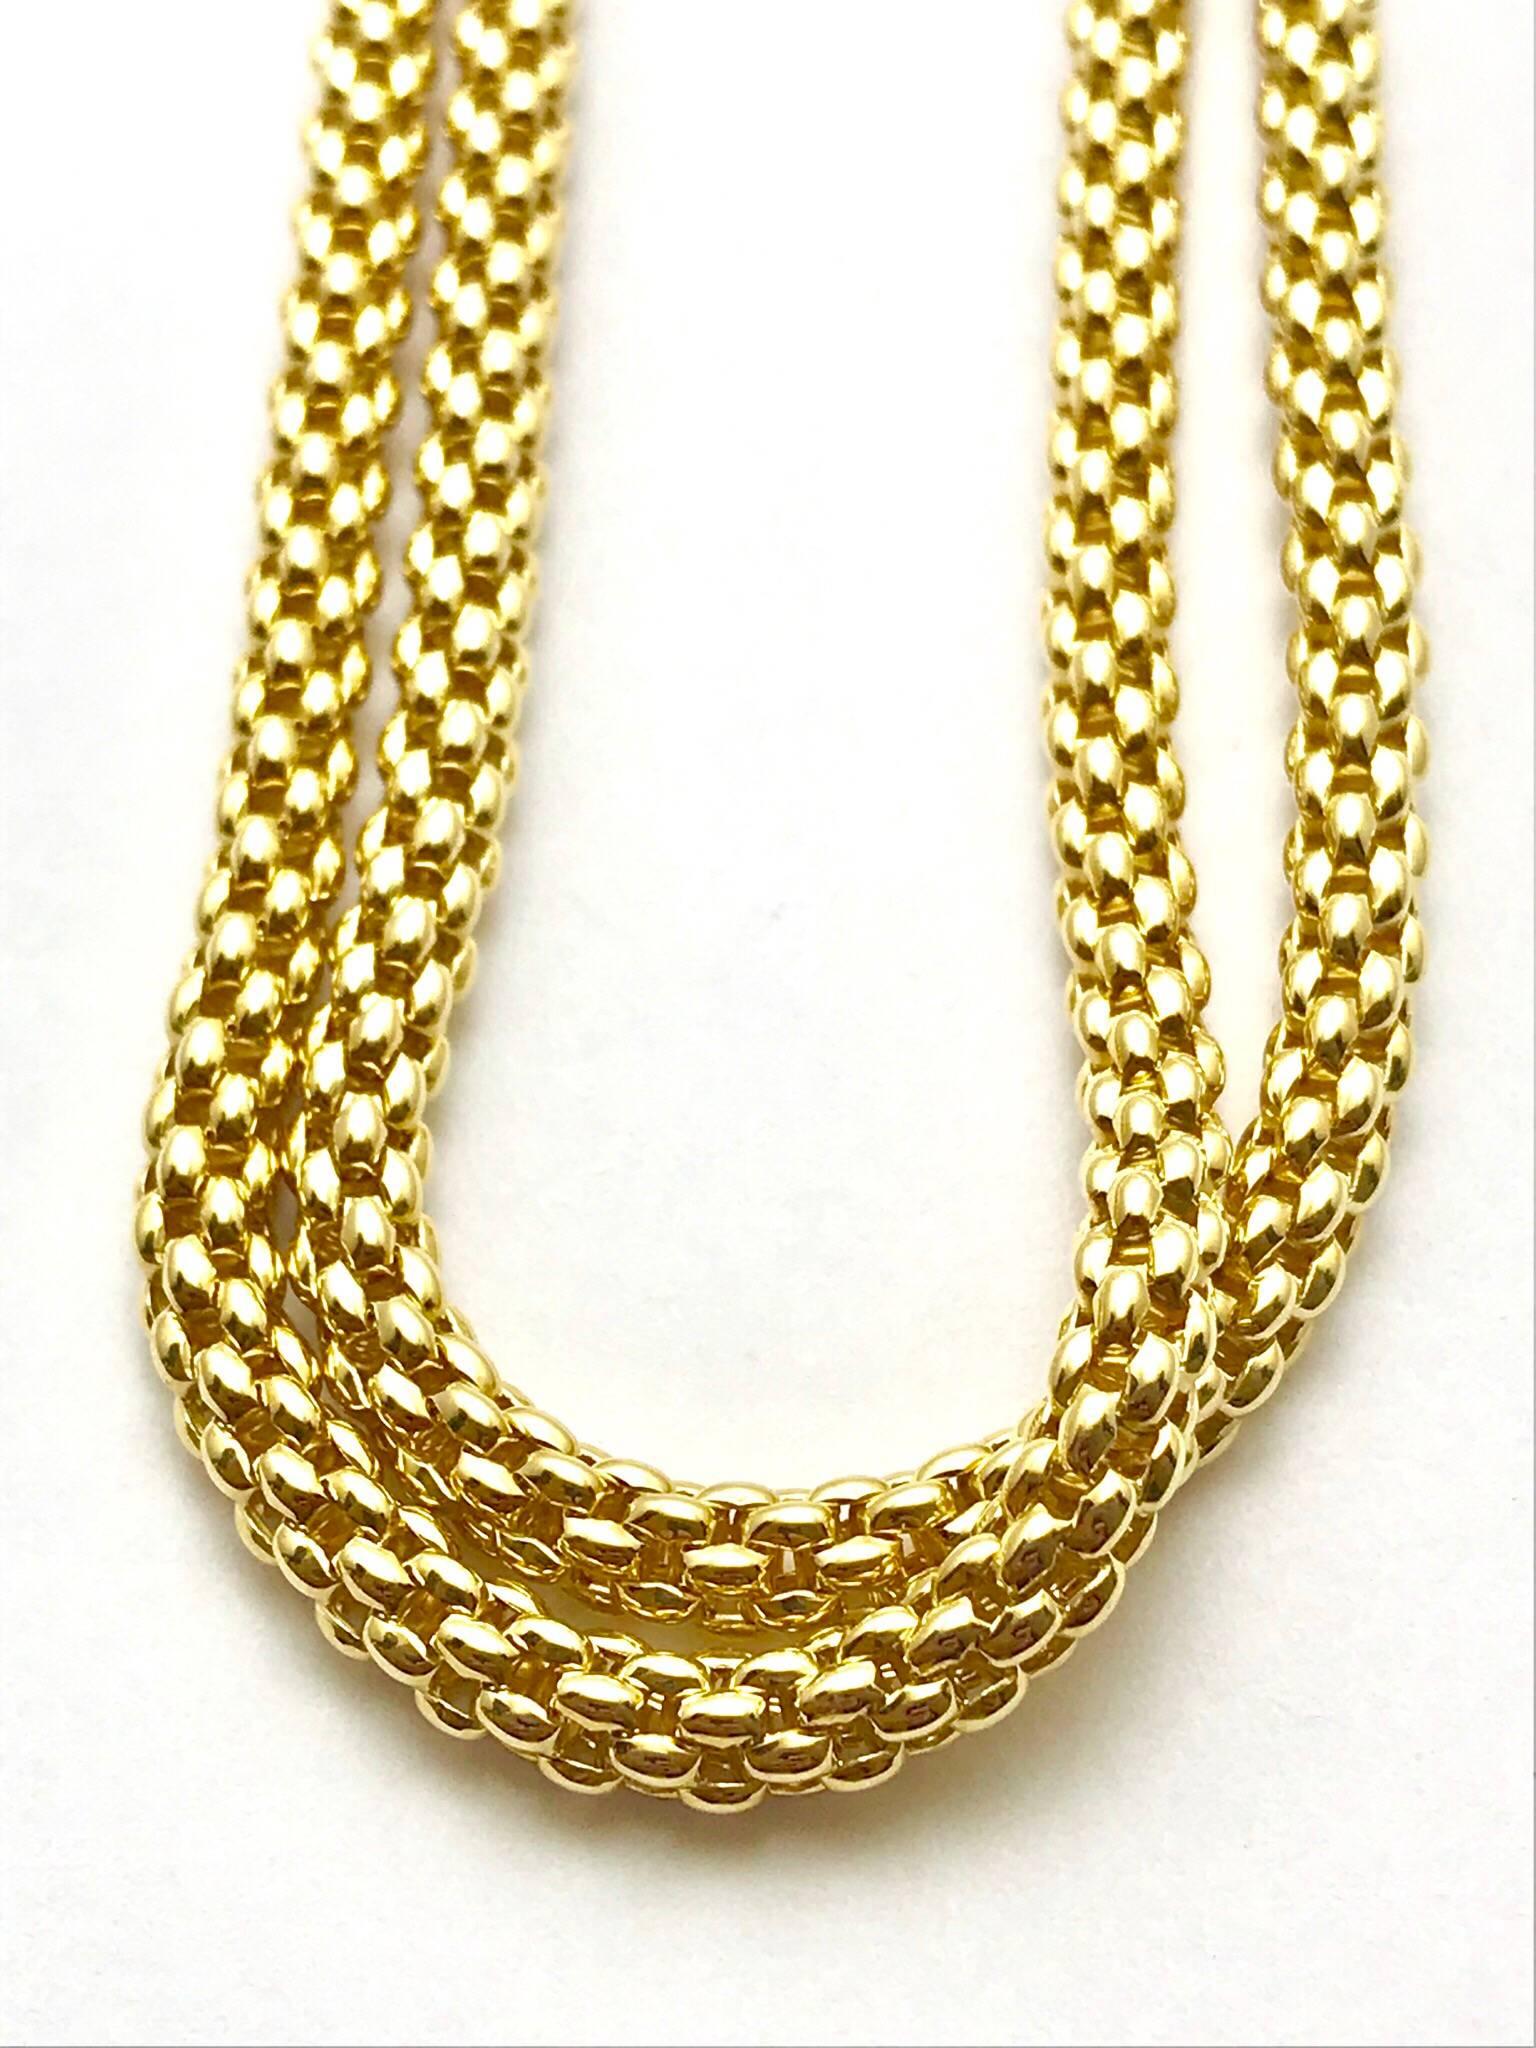 Fope Vendome 39.00 inch 18 karat woven yellow gold Italian made necklace.  Each individual link is slightly curved, creating an ultra soft feel.  The necklace can easily be worn long or doubled up.  This necklace also nests with a rose and white